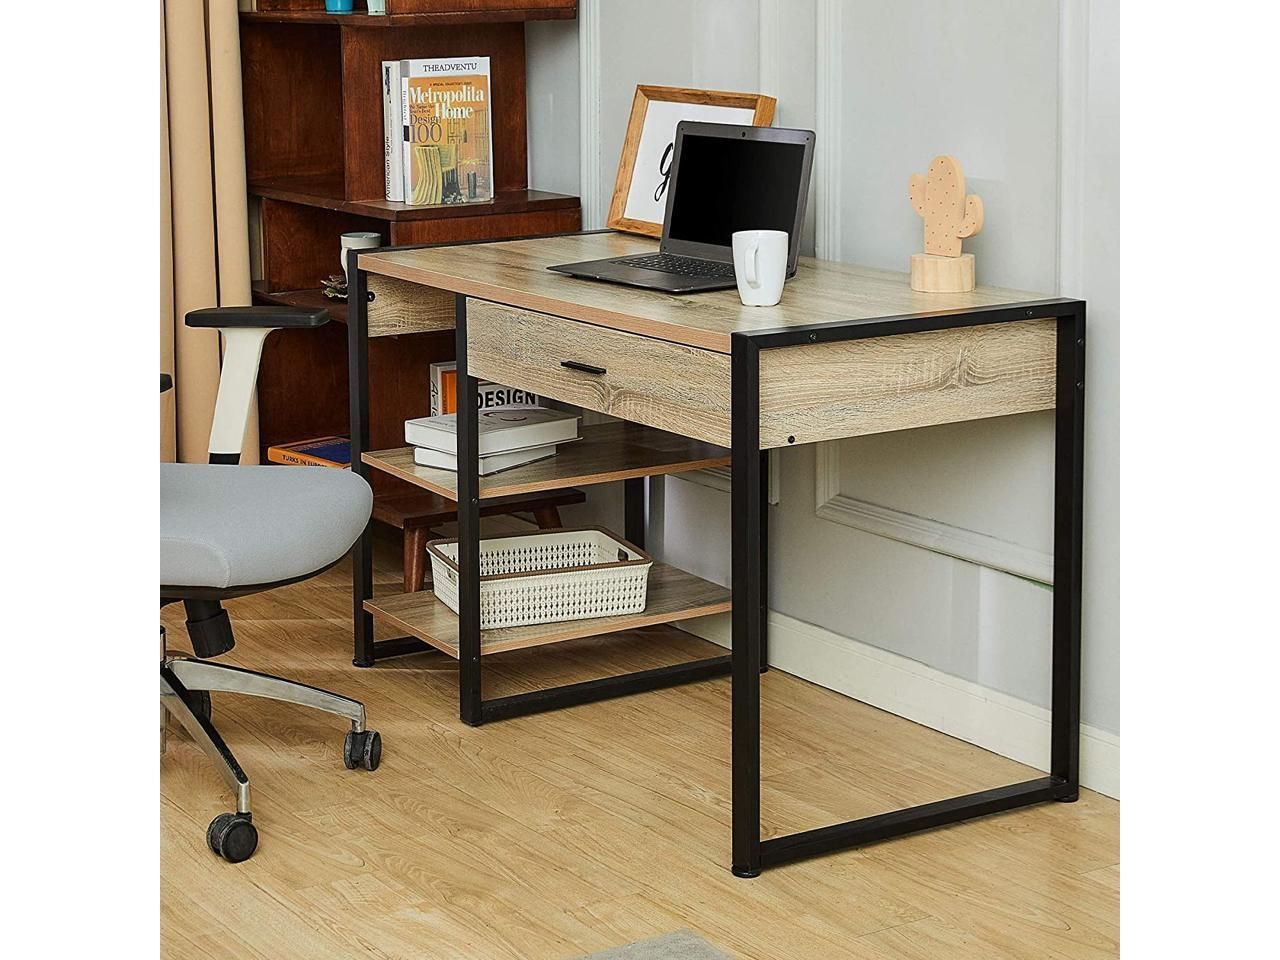 Co Z 47" Industrial Computer Desk W Drawer, 3 Prong Outlet, 2 Usb Ports With Acacia Wood Writing Desks With Usb Ports (View 11 of 15)